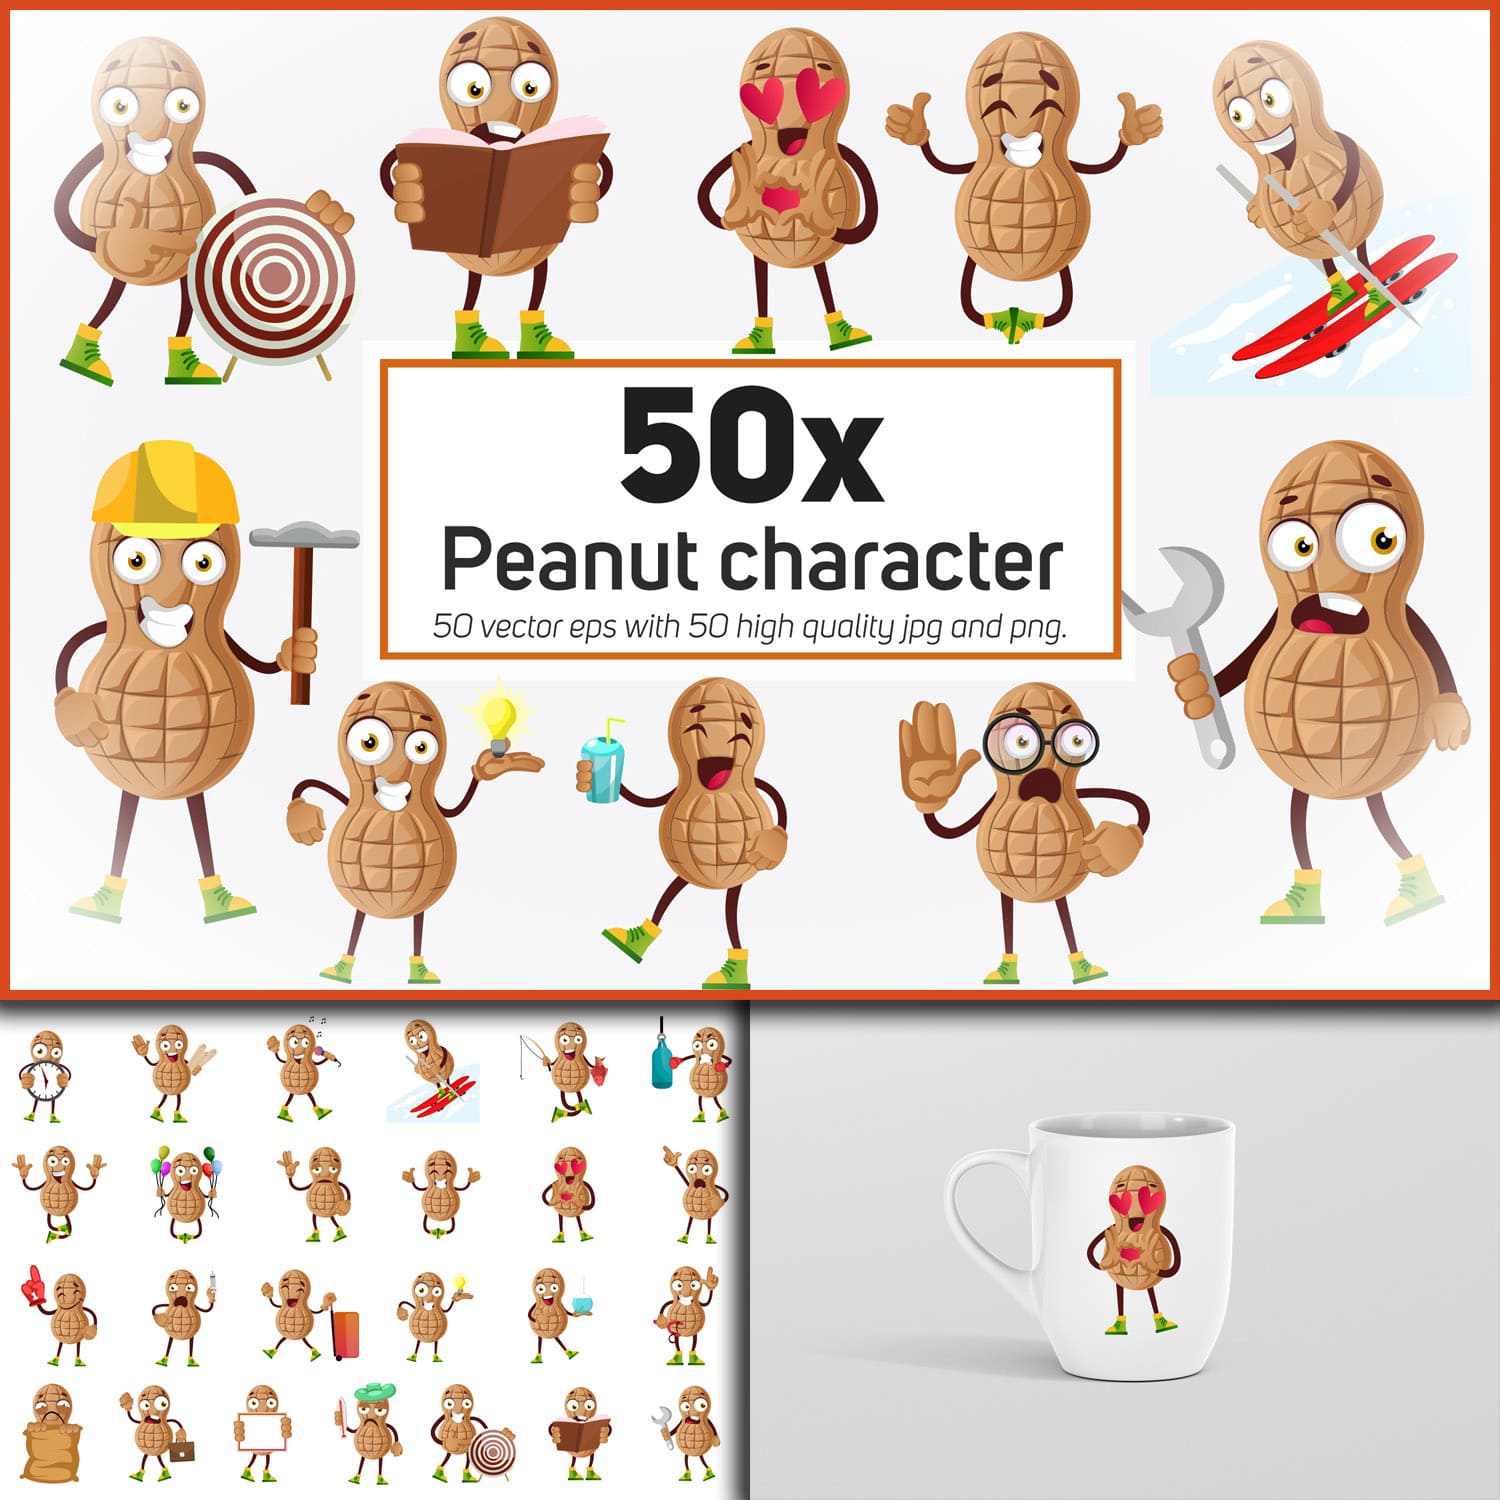 Prints of peanut character or mascot in different situations.